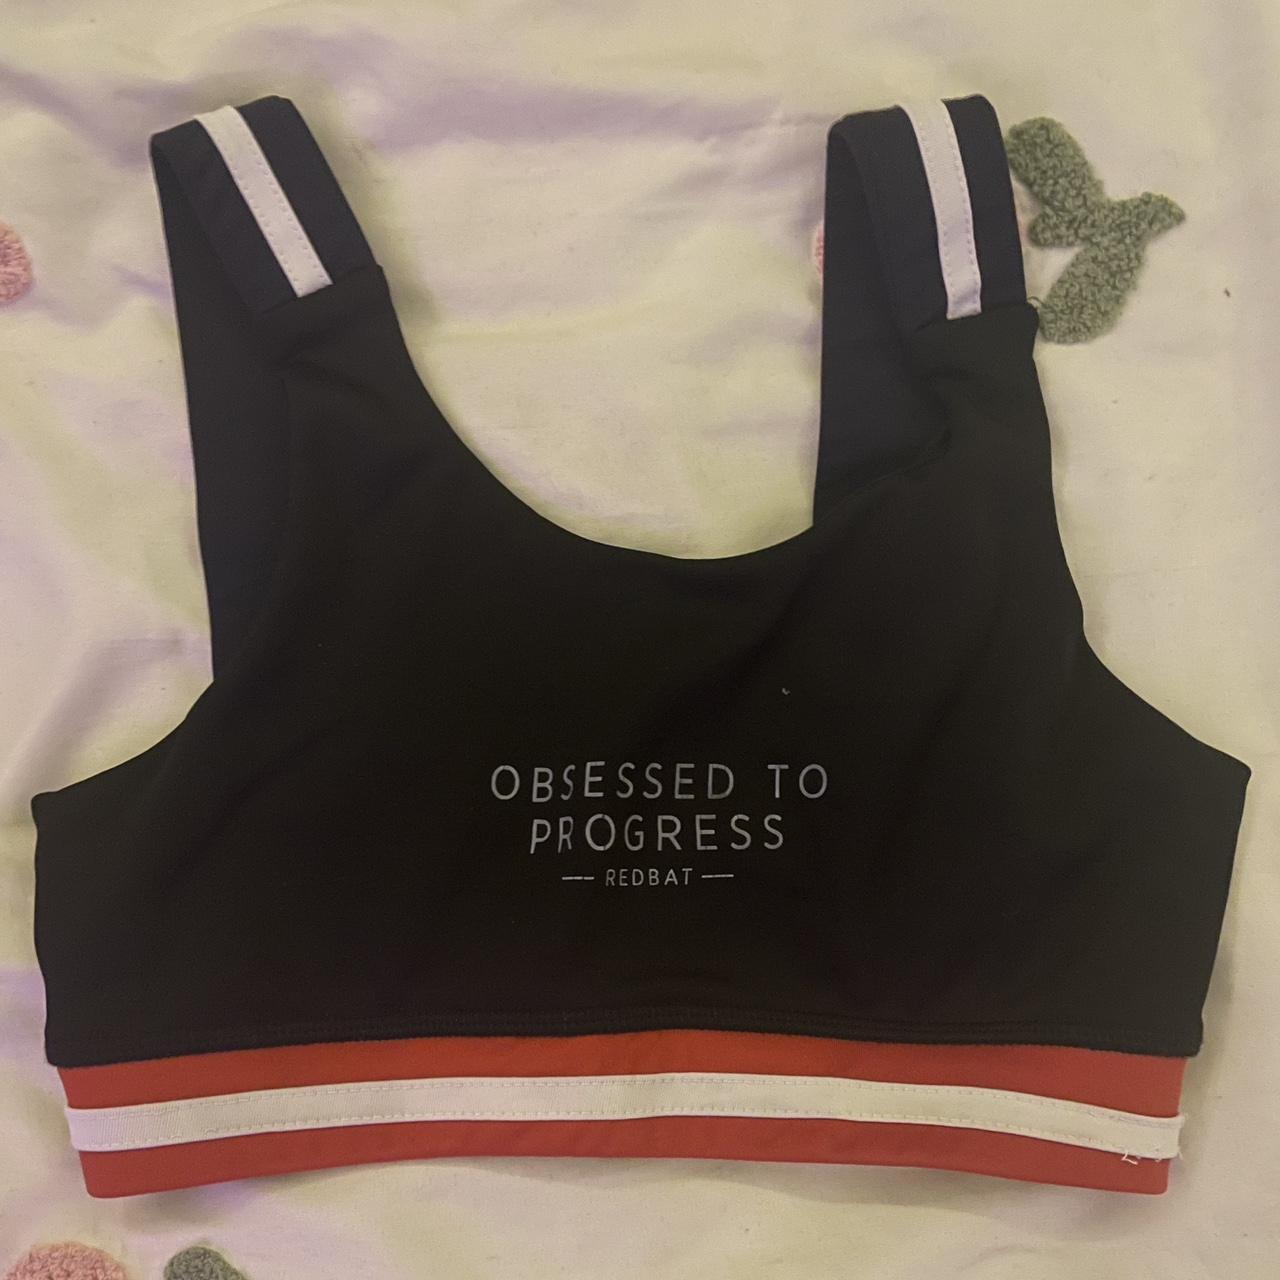 redbat sports top / bralet perfect for gym or in - Depop